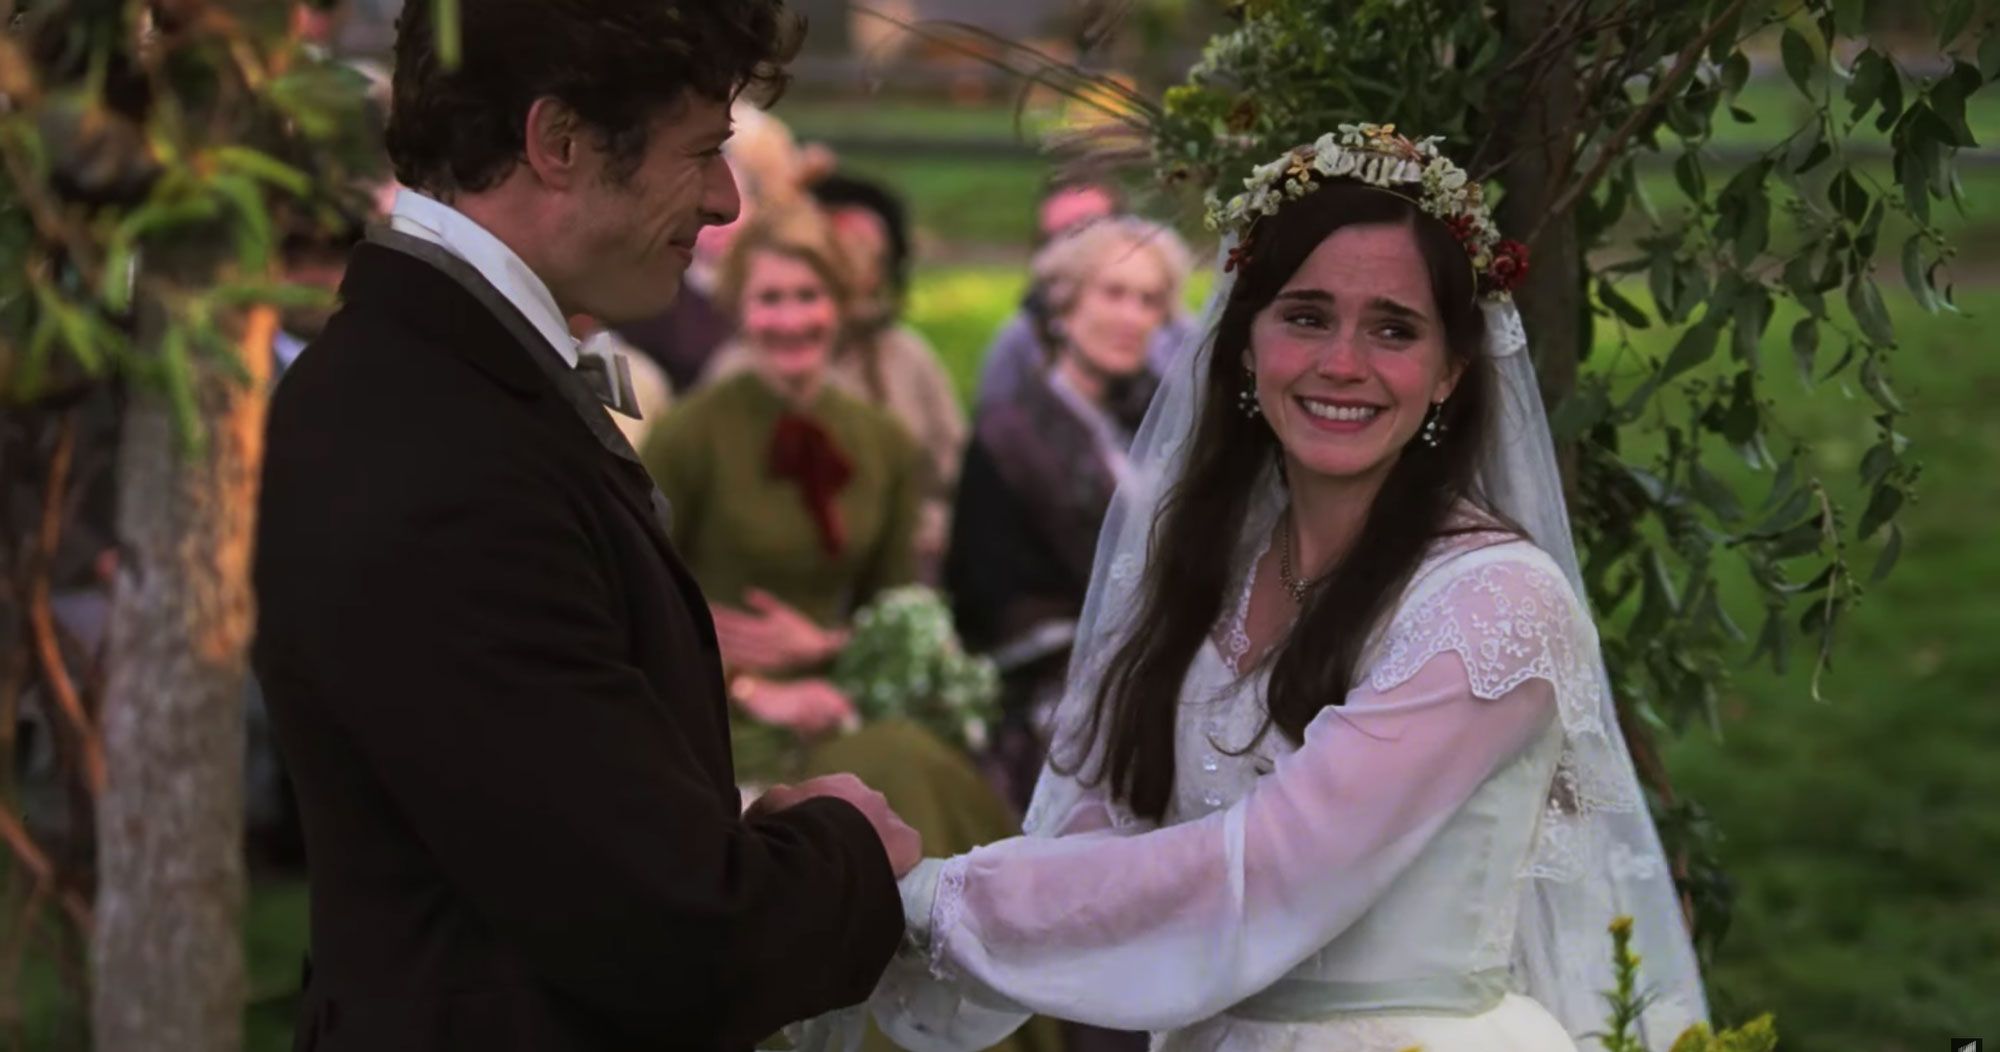 Meg stands in her wedding dress, holding hands with her soon-to-be husband.